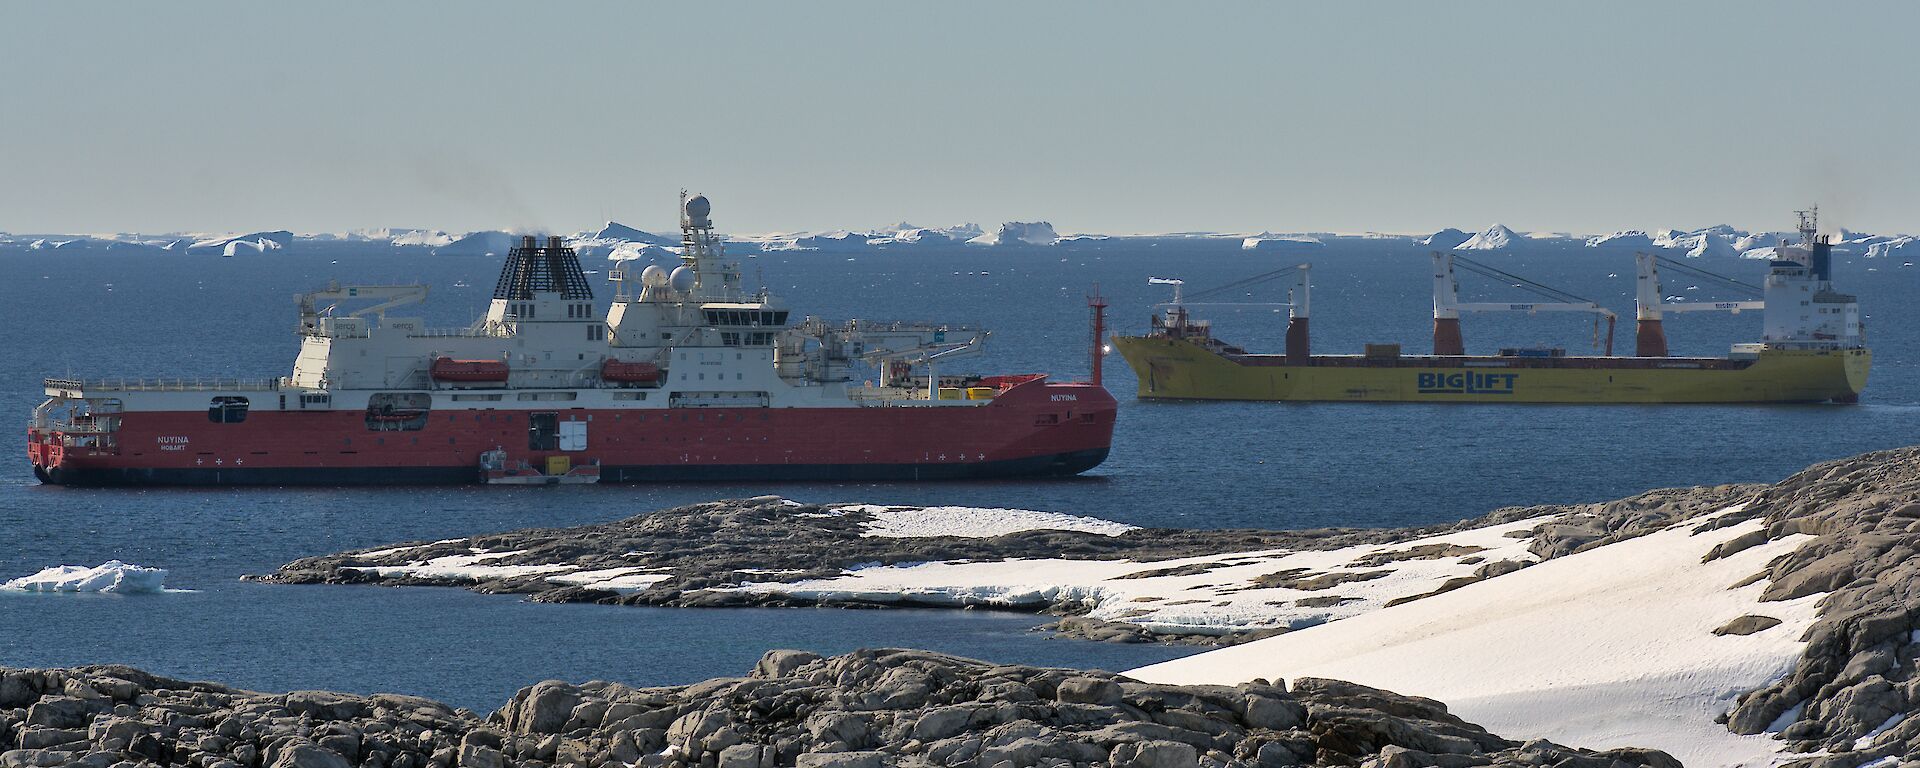 Two large ships, one with a red hull, the other with a yellow hull, beside each other in the ocean, viewed over a rocky and snowy coastline. A number of icebergs are floating in the background, on the ocean horizon